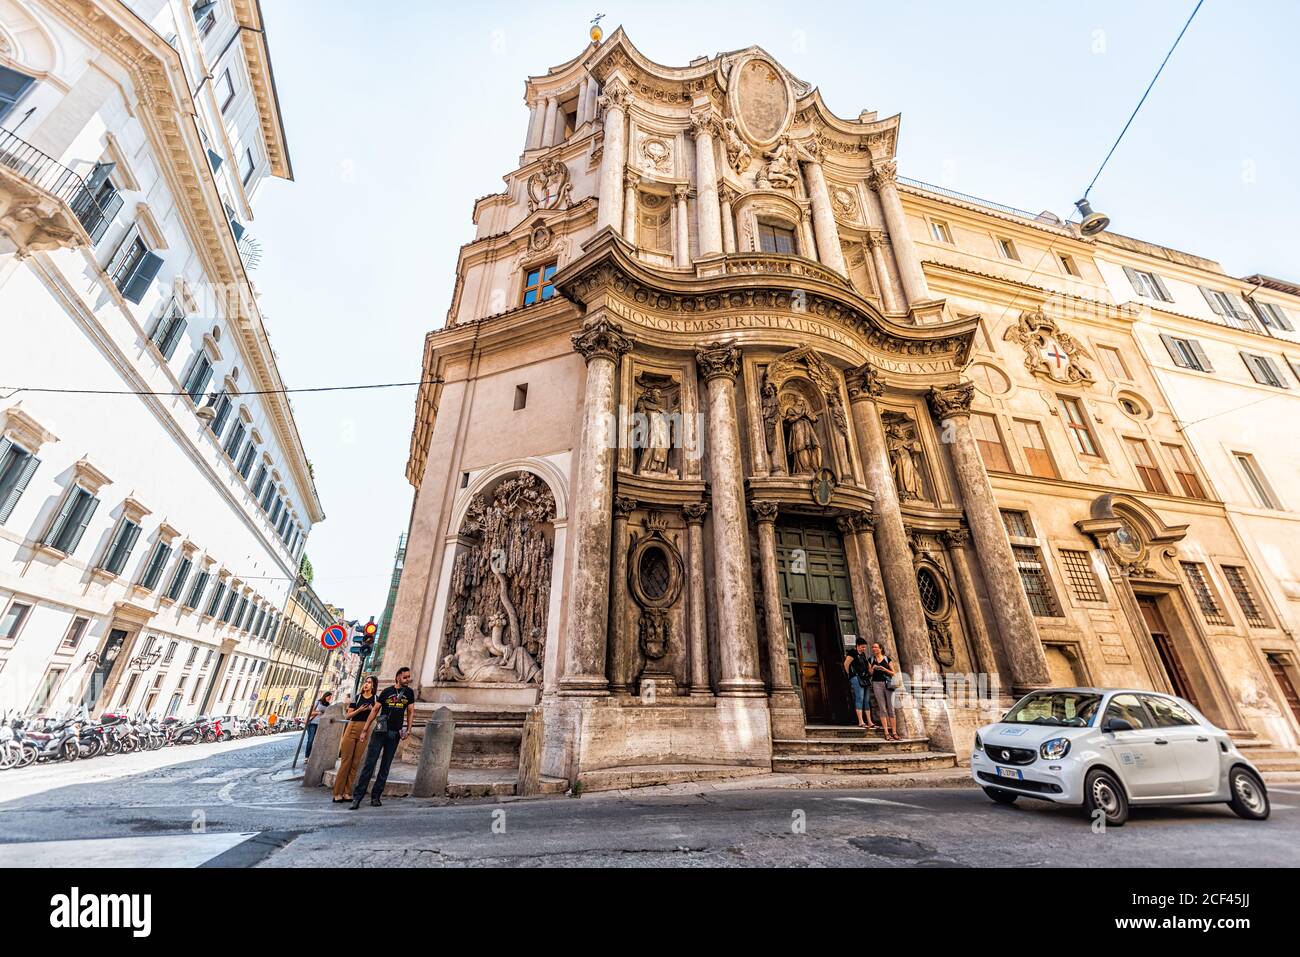 Rome, Italy - September 5, 2018: Italian street outside in historic city wide angle view of building church Chiesa di San Carlino alle Quattro Fontane Stock Photo